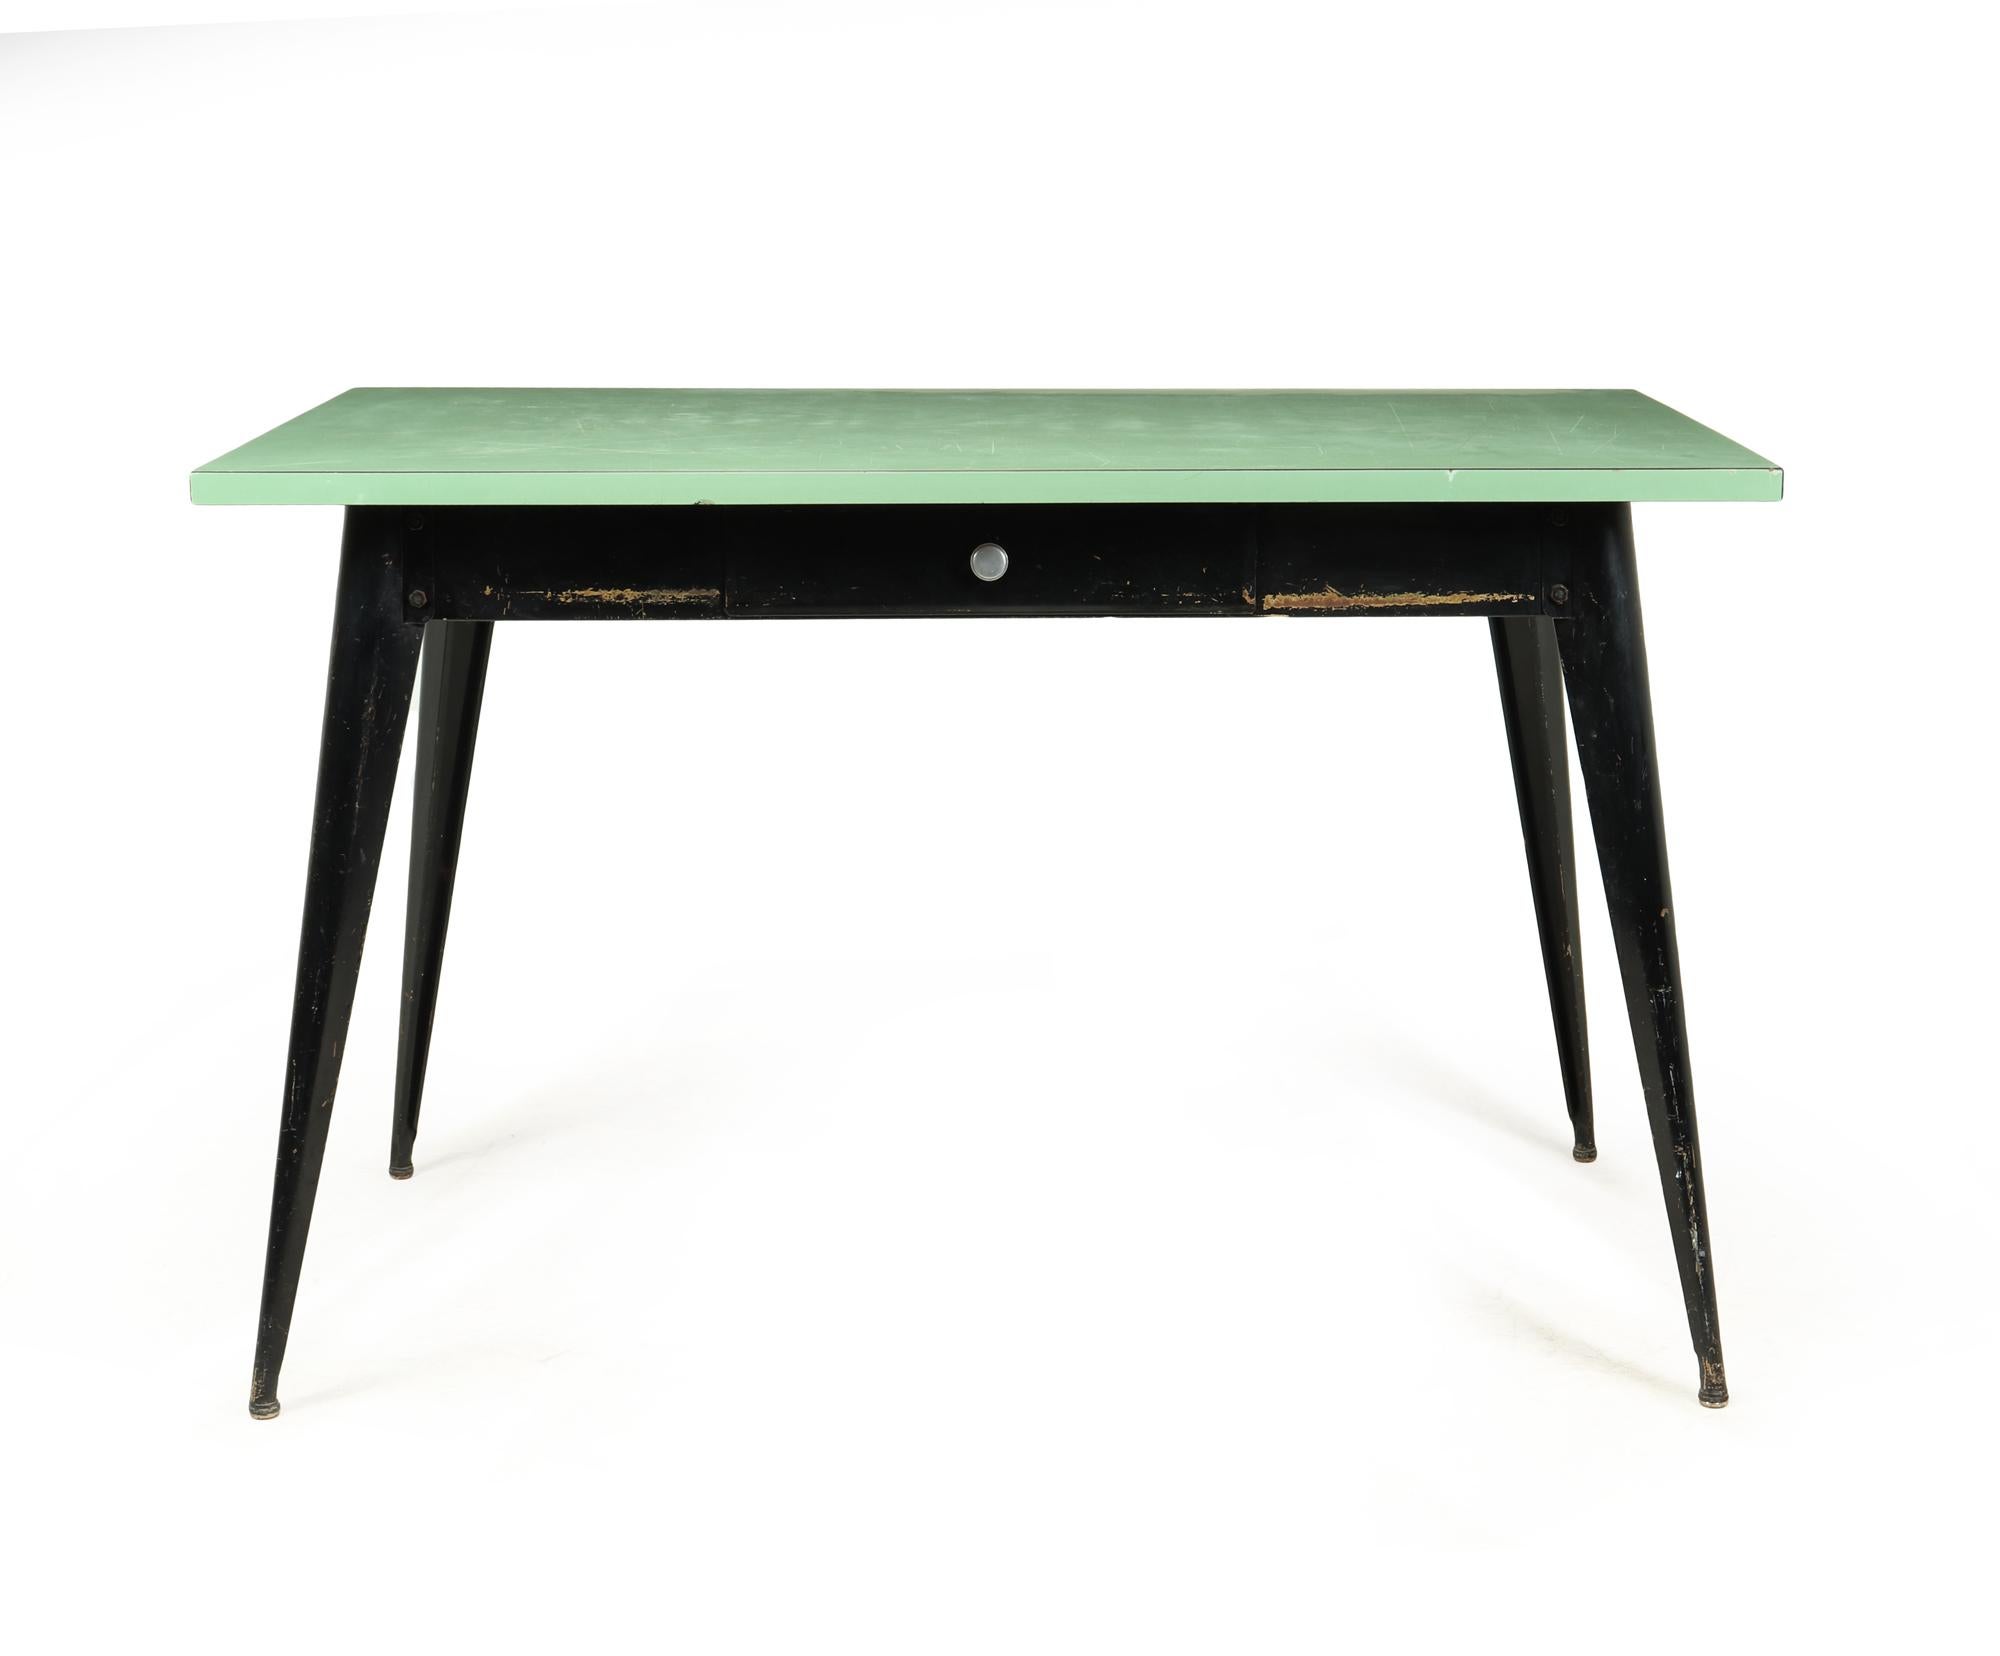 A rare original T55 Desk designed by Xavier Pauchard for Tolix produced in France in the 1950’s, this example has green melamine top on black painted steel base with single drawer, the desk is in very good condition throughout with wear and age